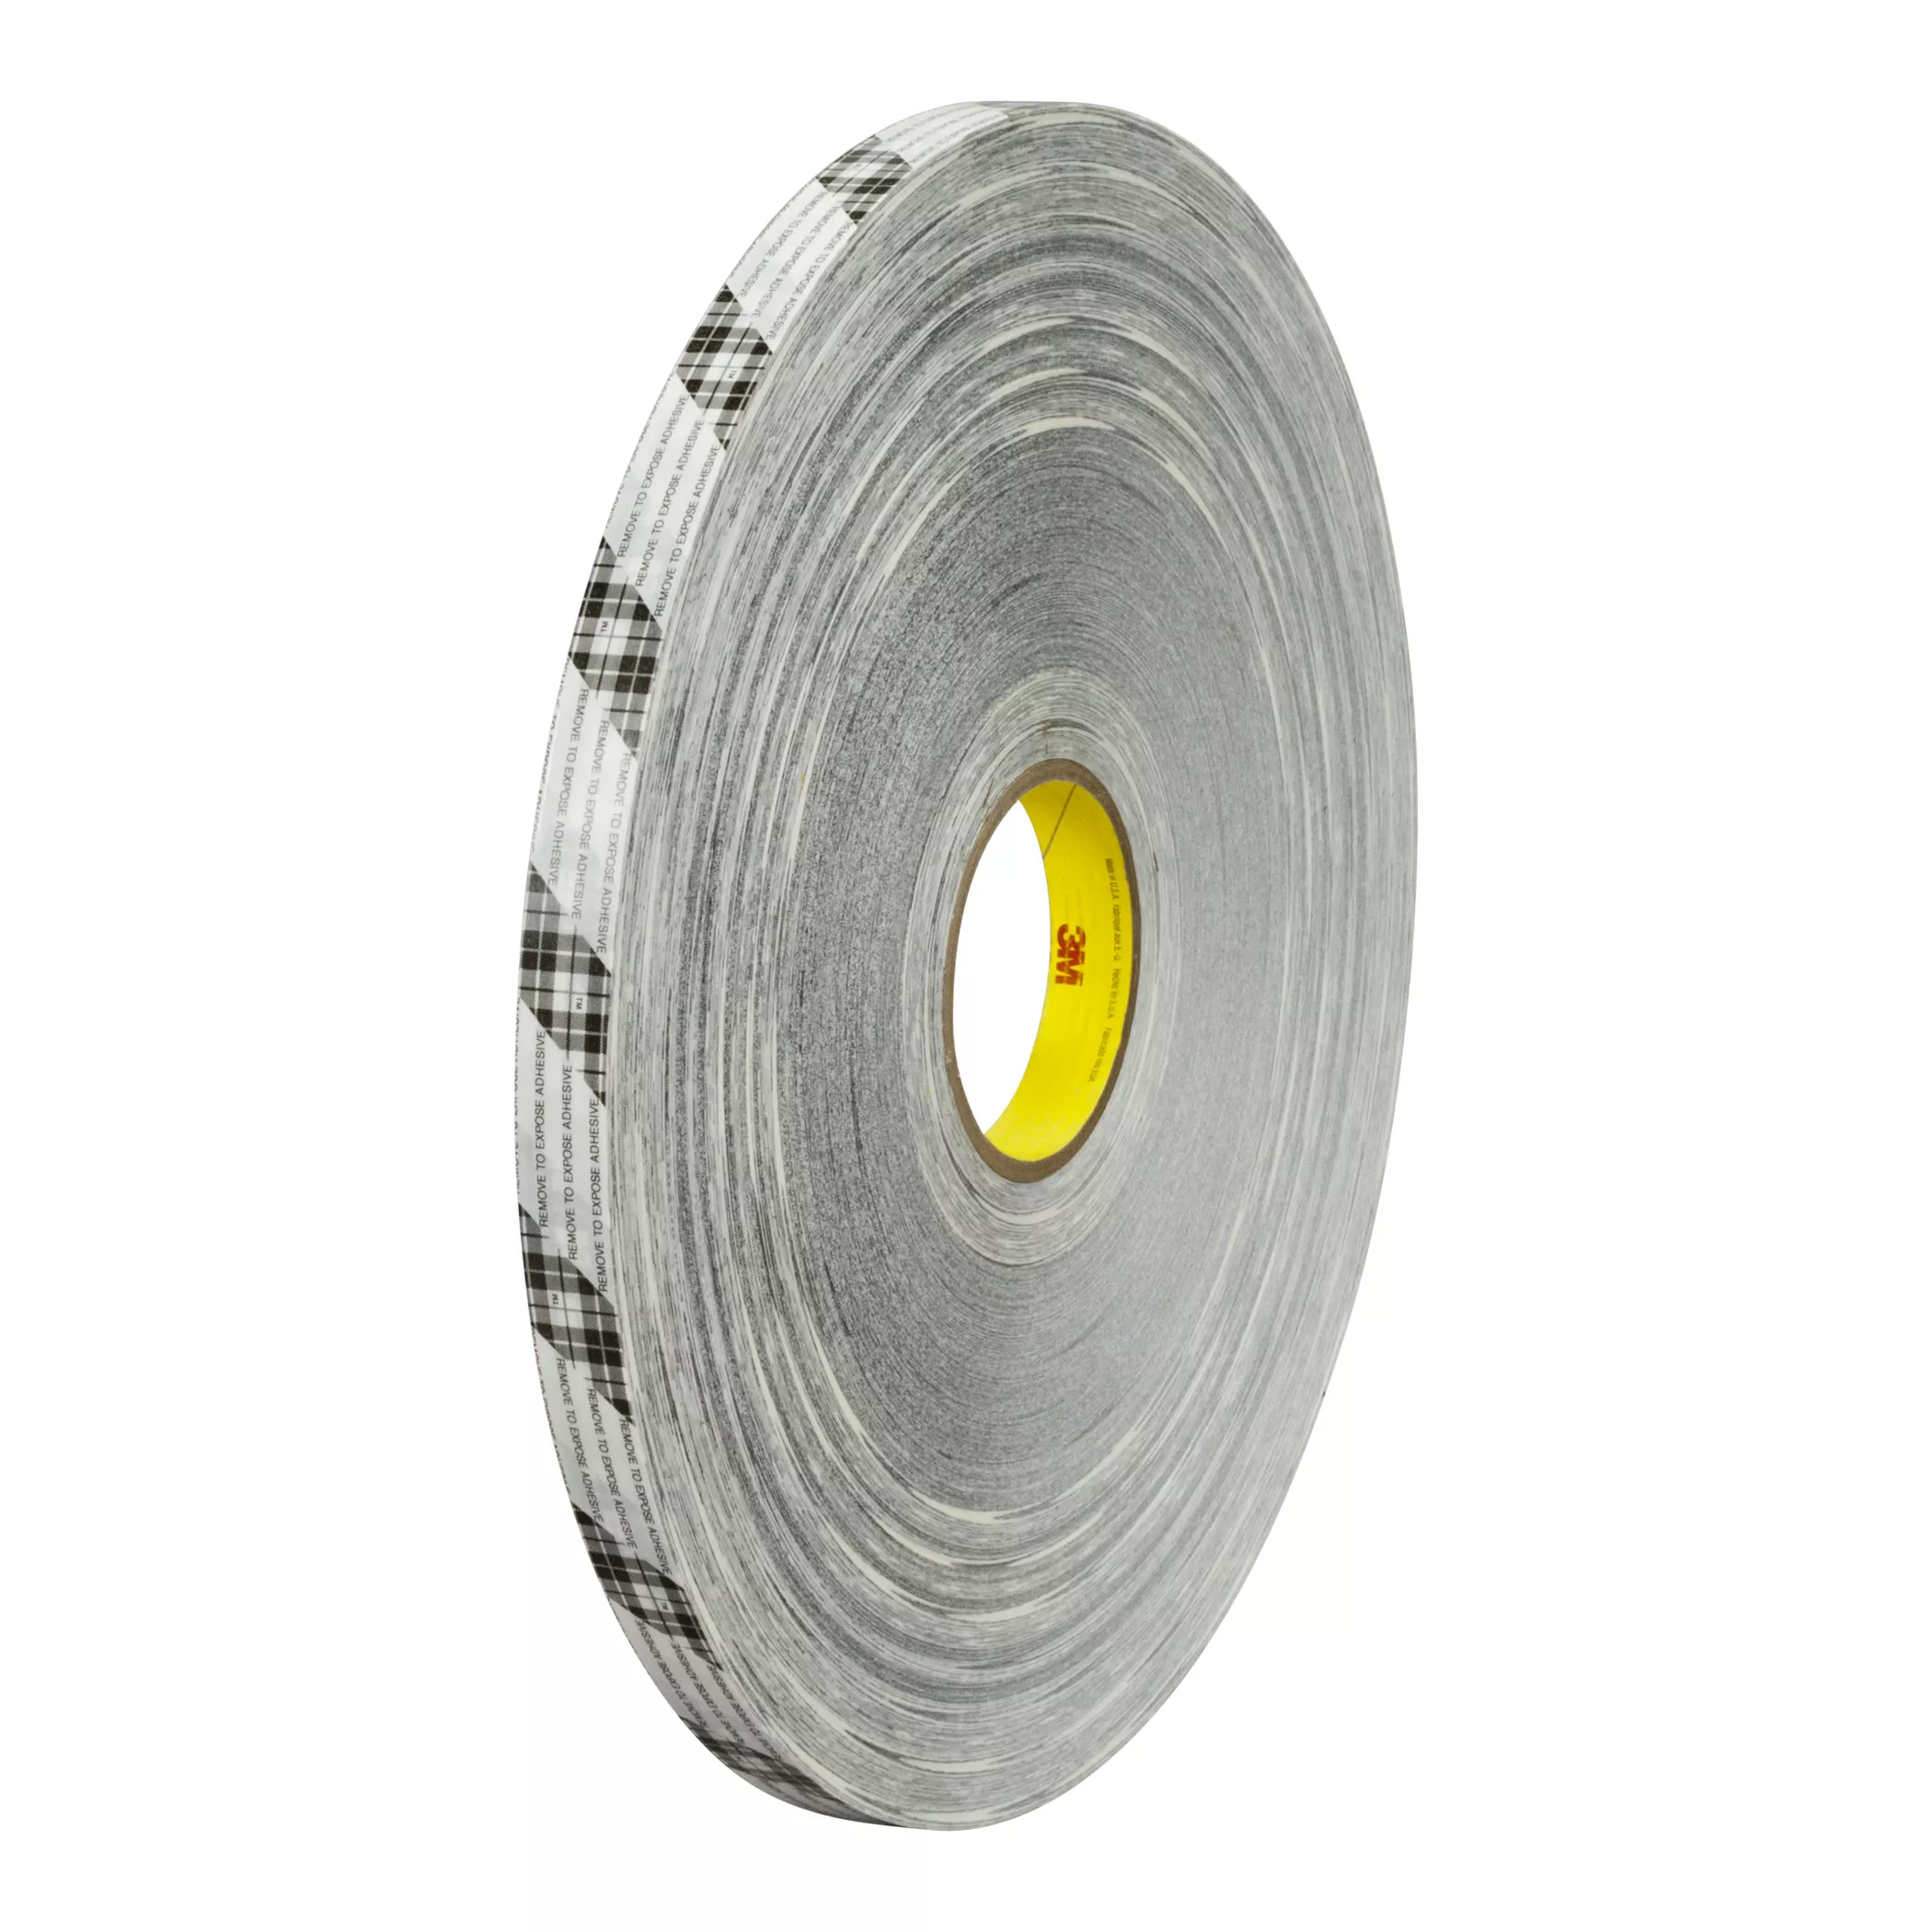 3M™ Double Coated Tape Extended Liner 9925XL, Off-white Translucent, 1/2
in x 750 yd, 2.5 mil, 12 Roll/Case